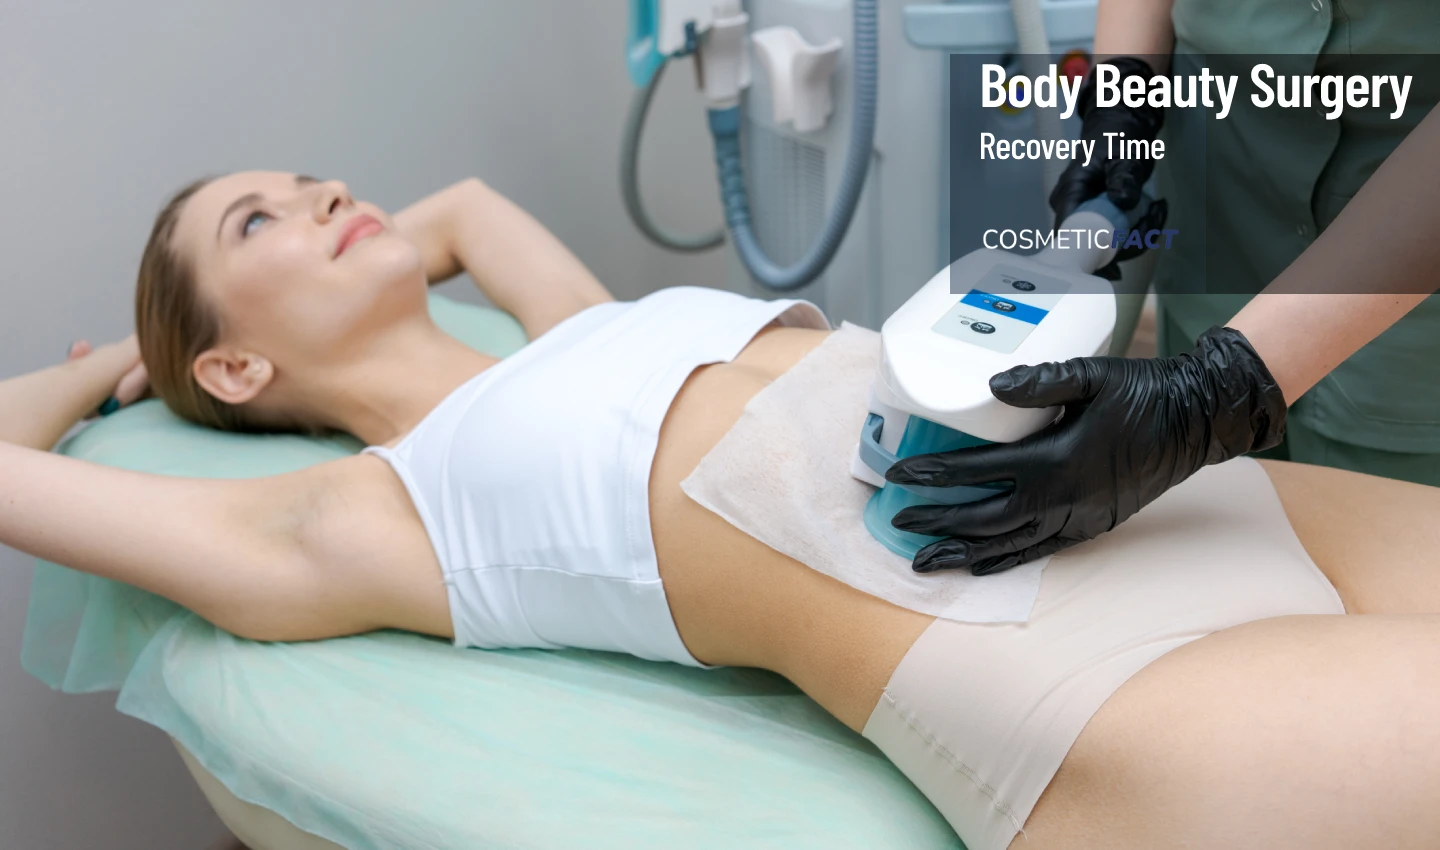 A doctor uses a recovery device on a patient's belly after body cosmetic surgery to shorten recovery time.